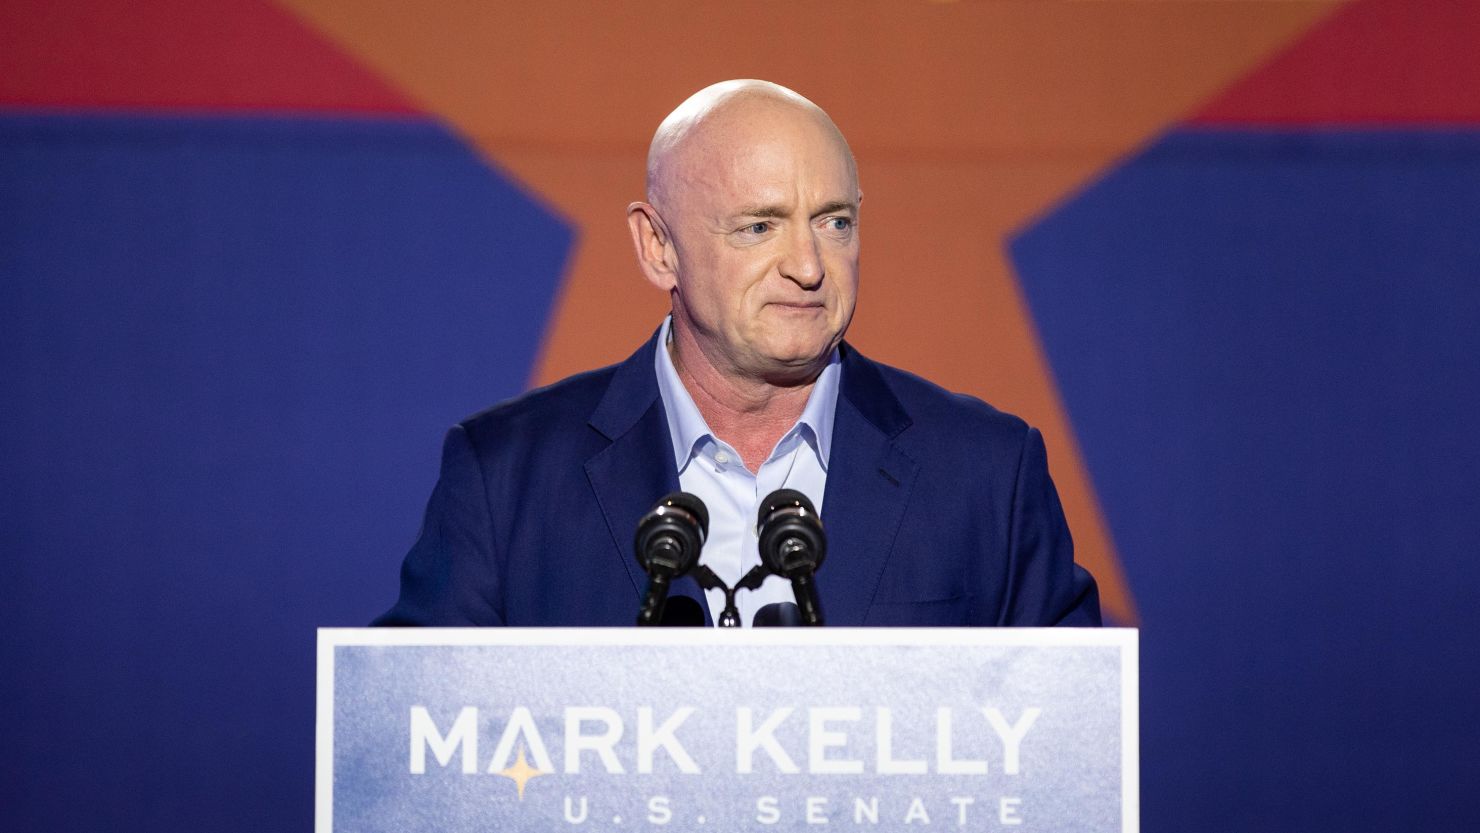 Democratic US. Senate candidate Mark Kelly speaks to supporters during the Election Night event at Hotel Congress on November 3, 2020, in Tucson, Arizona. 